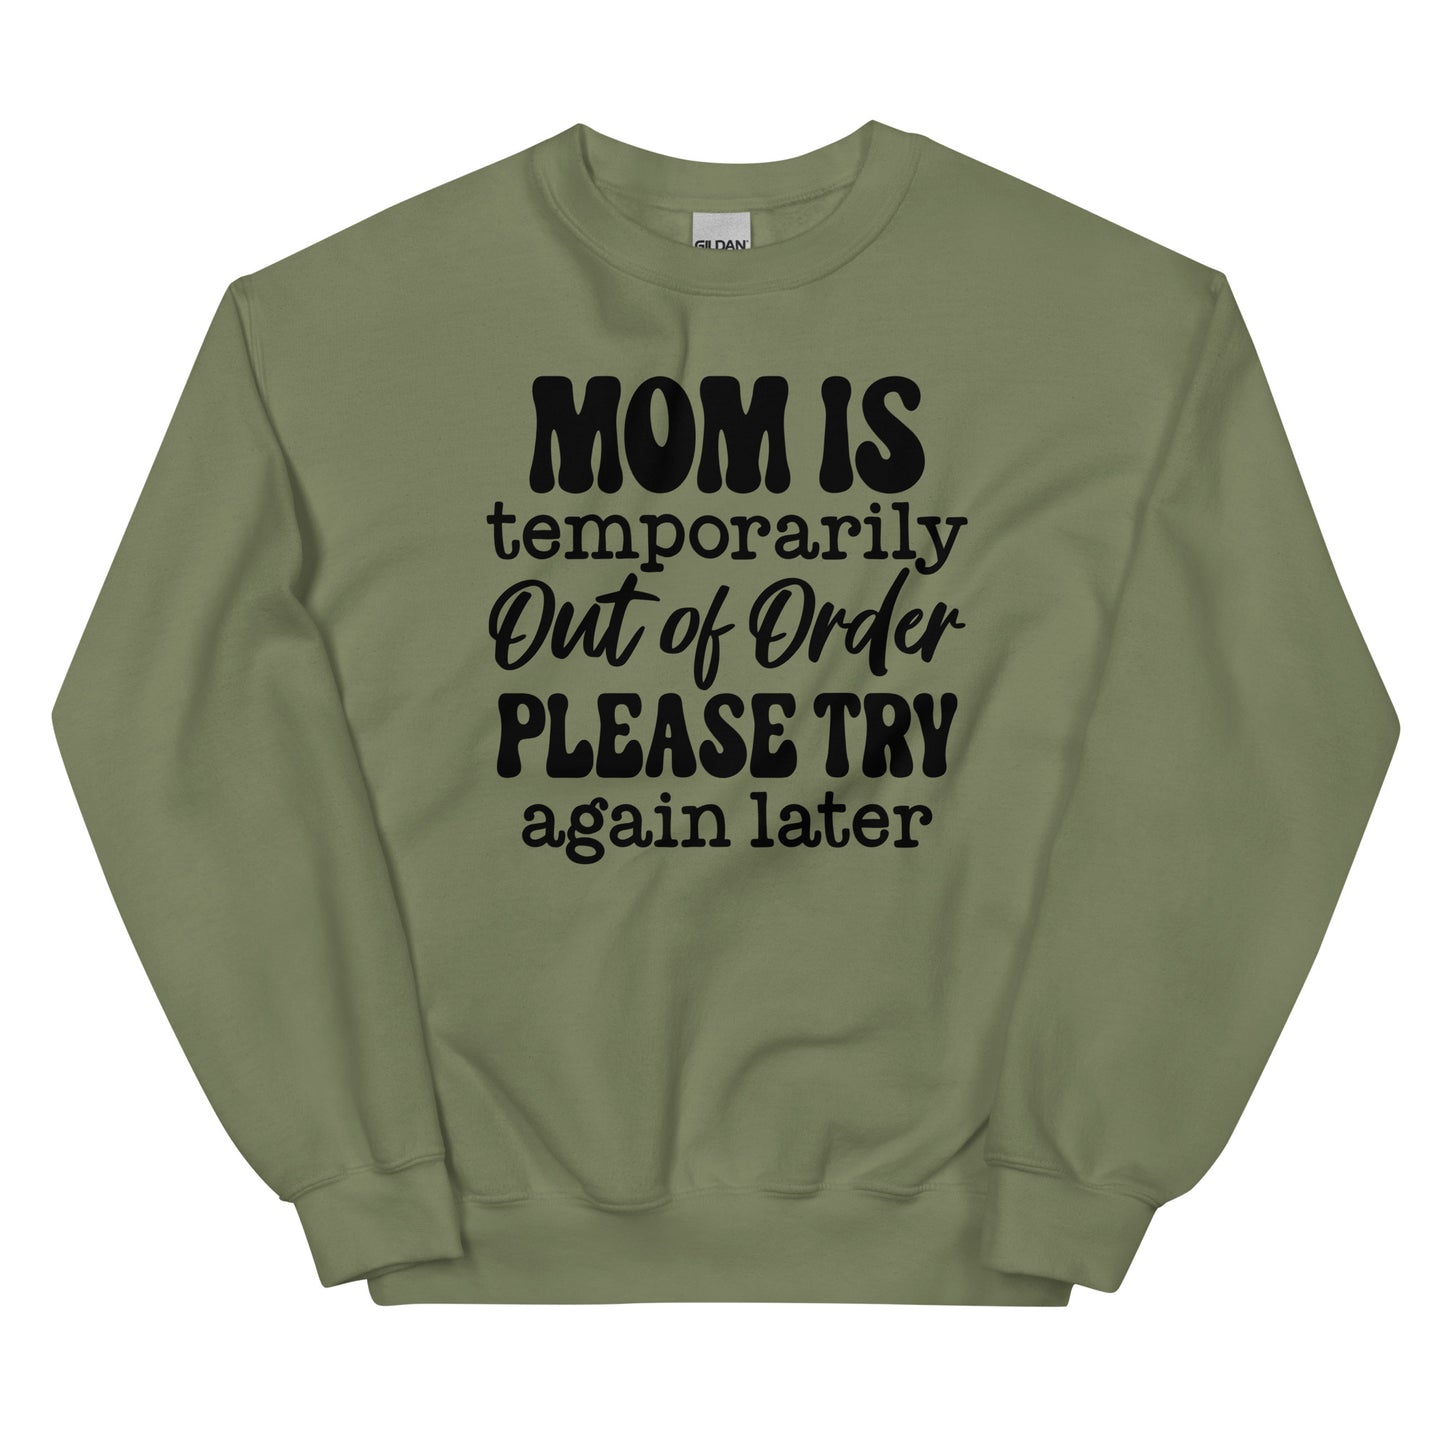 Mom is Temporarily Out of Order, Please Try Again Later Crewneck Pullover Sweatshirt